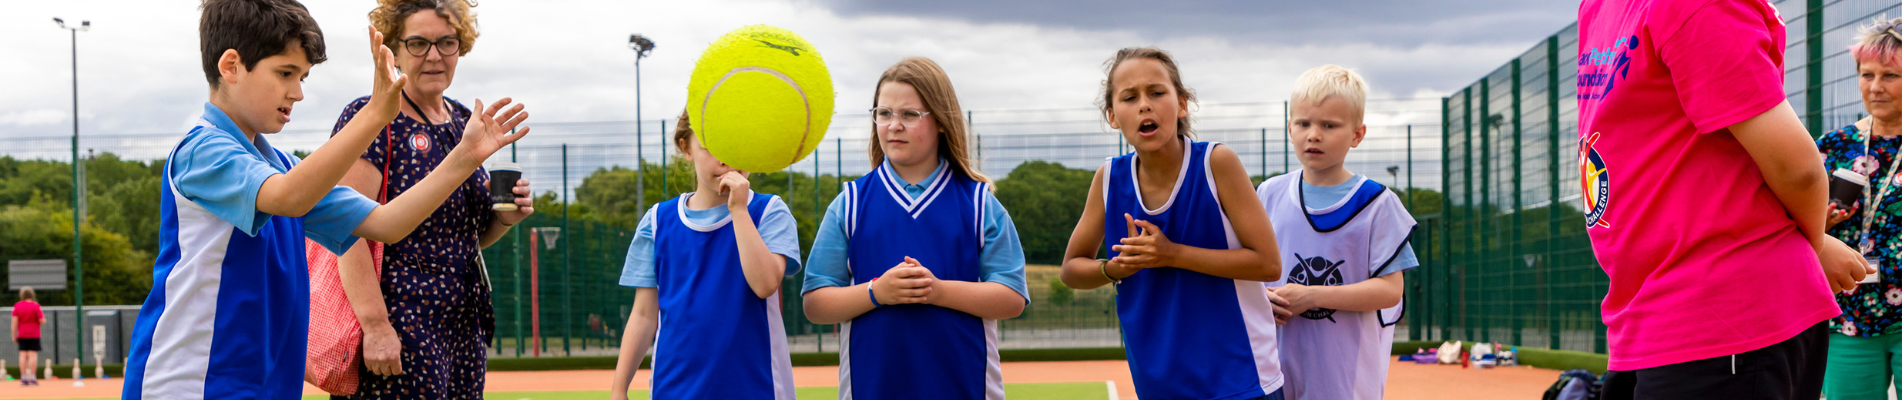 Physical Activity At School | Active Essex